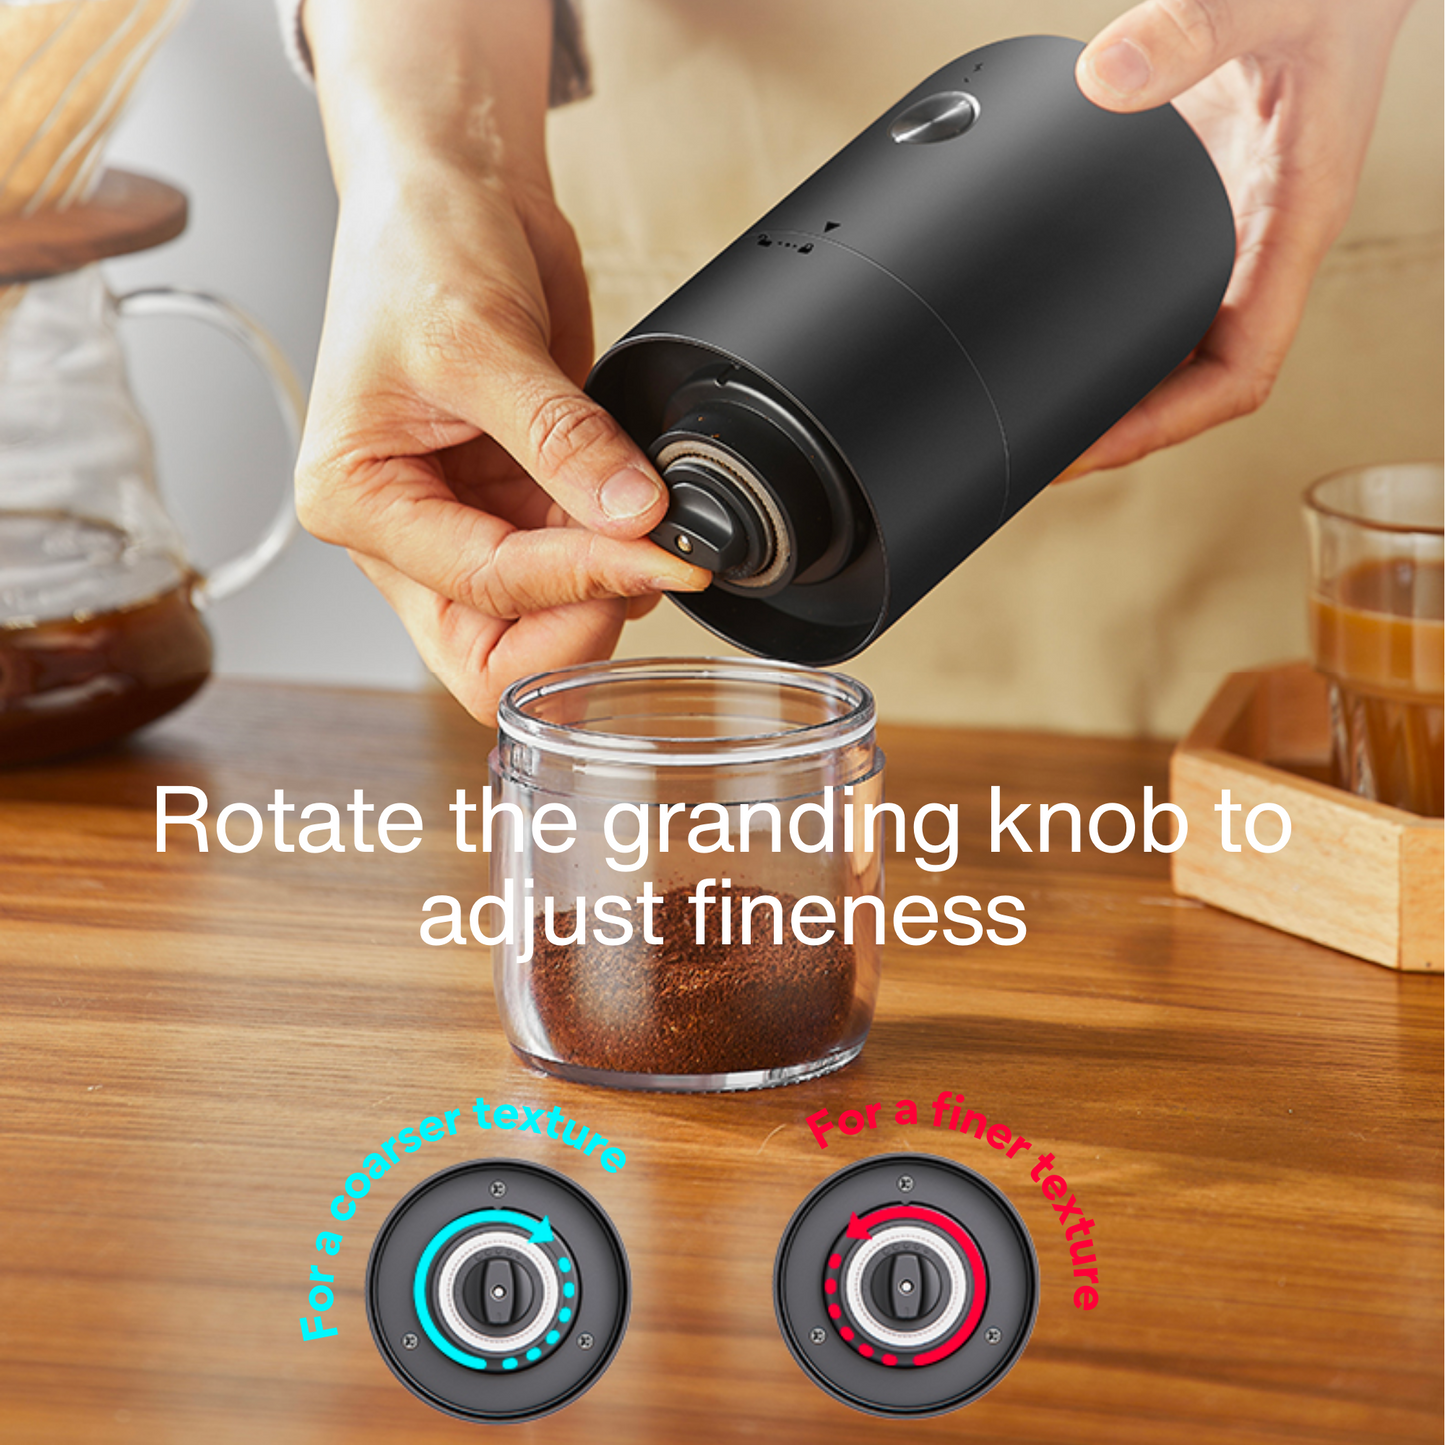 Portable Electric Coffee Grinder with USB-C port charging